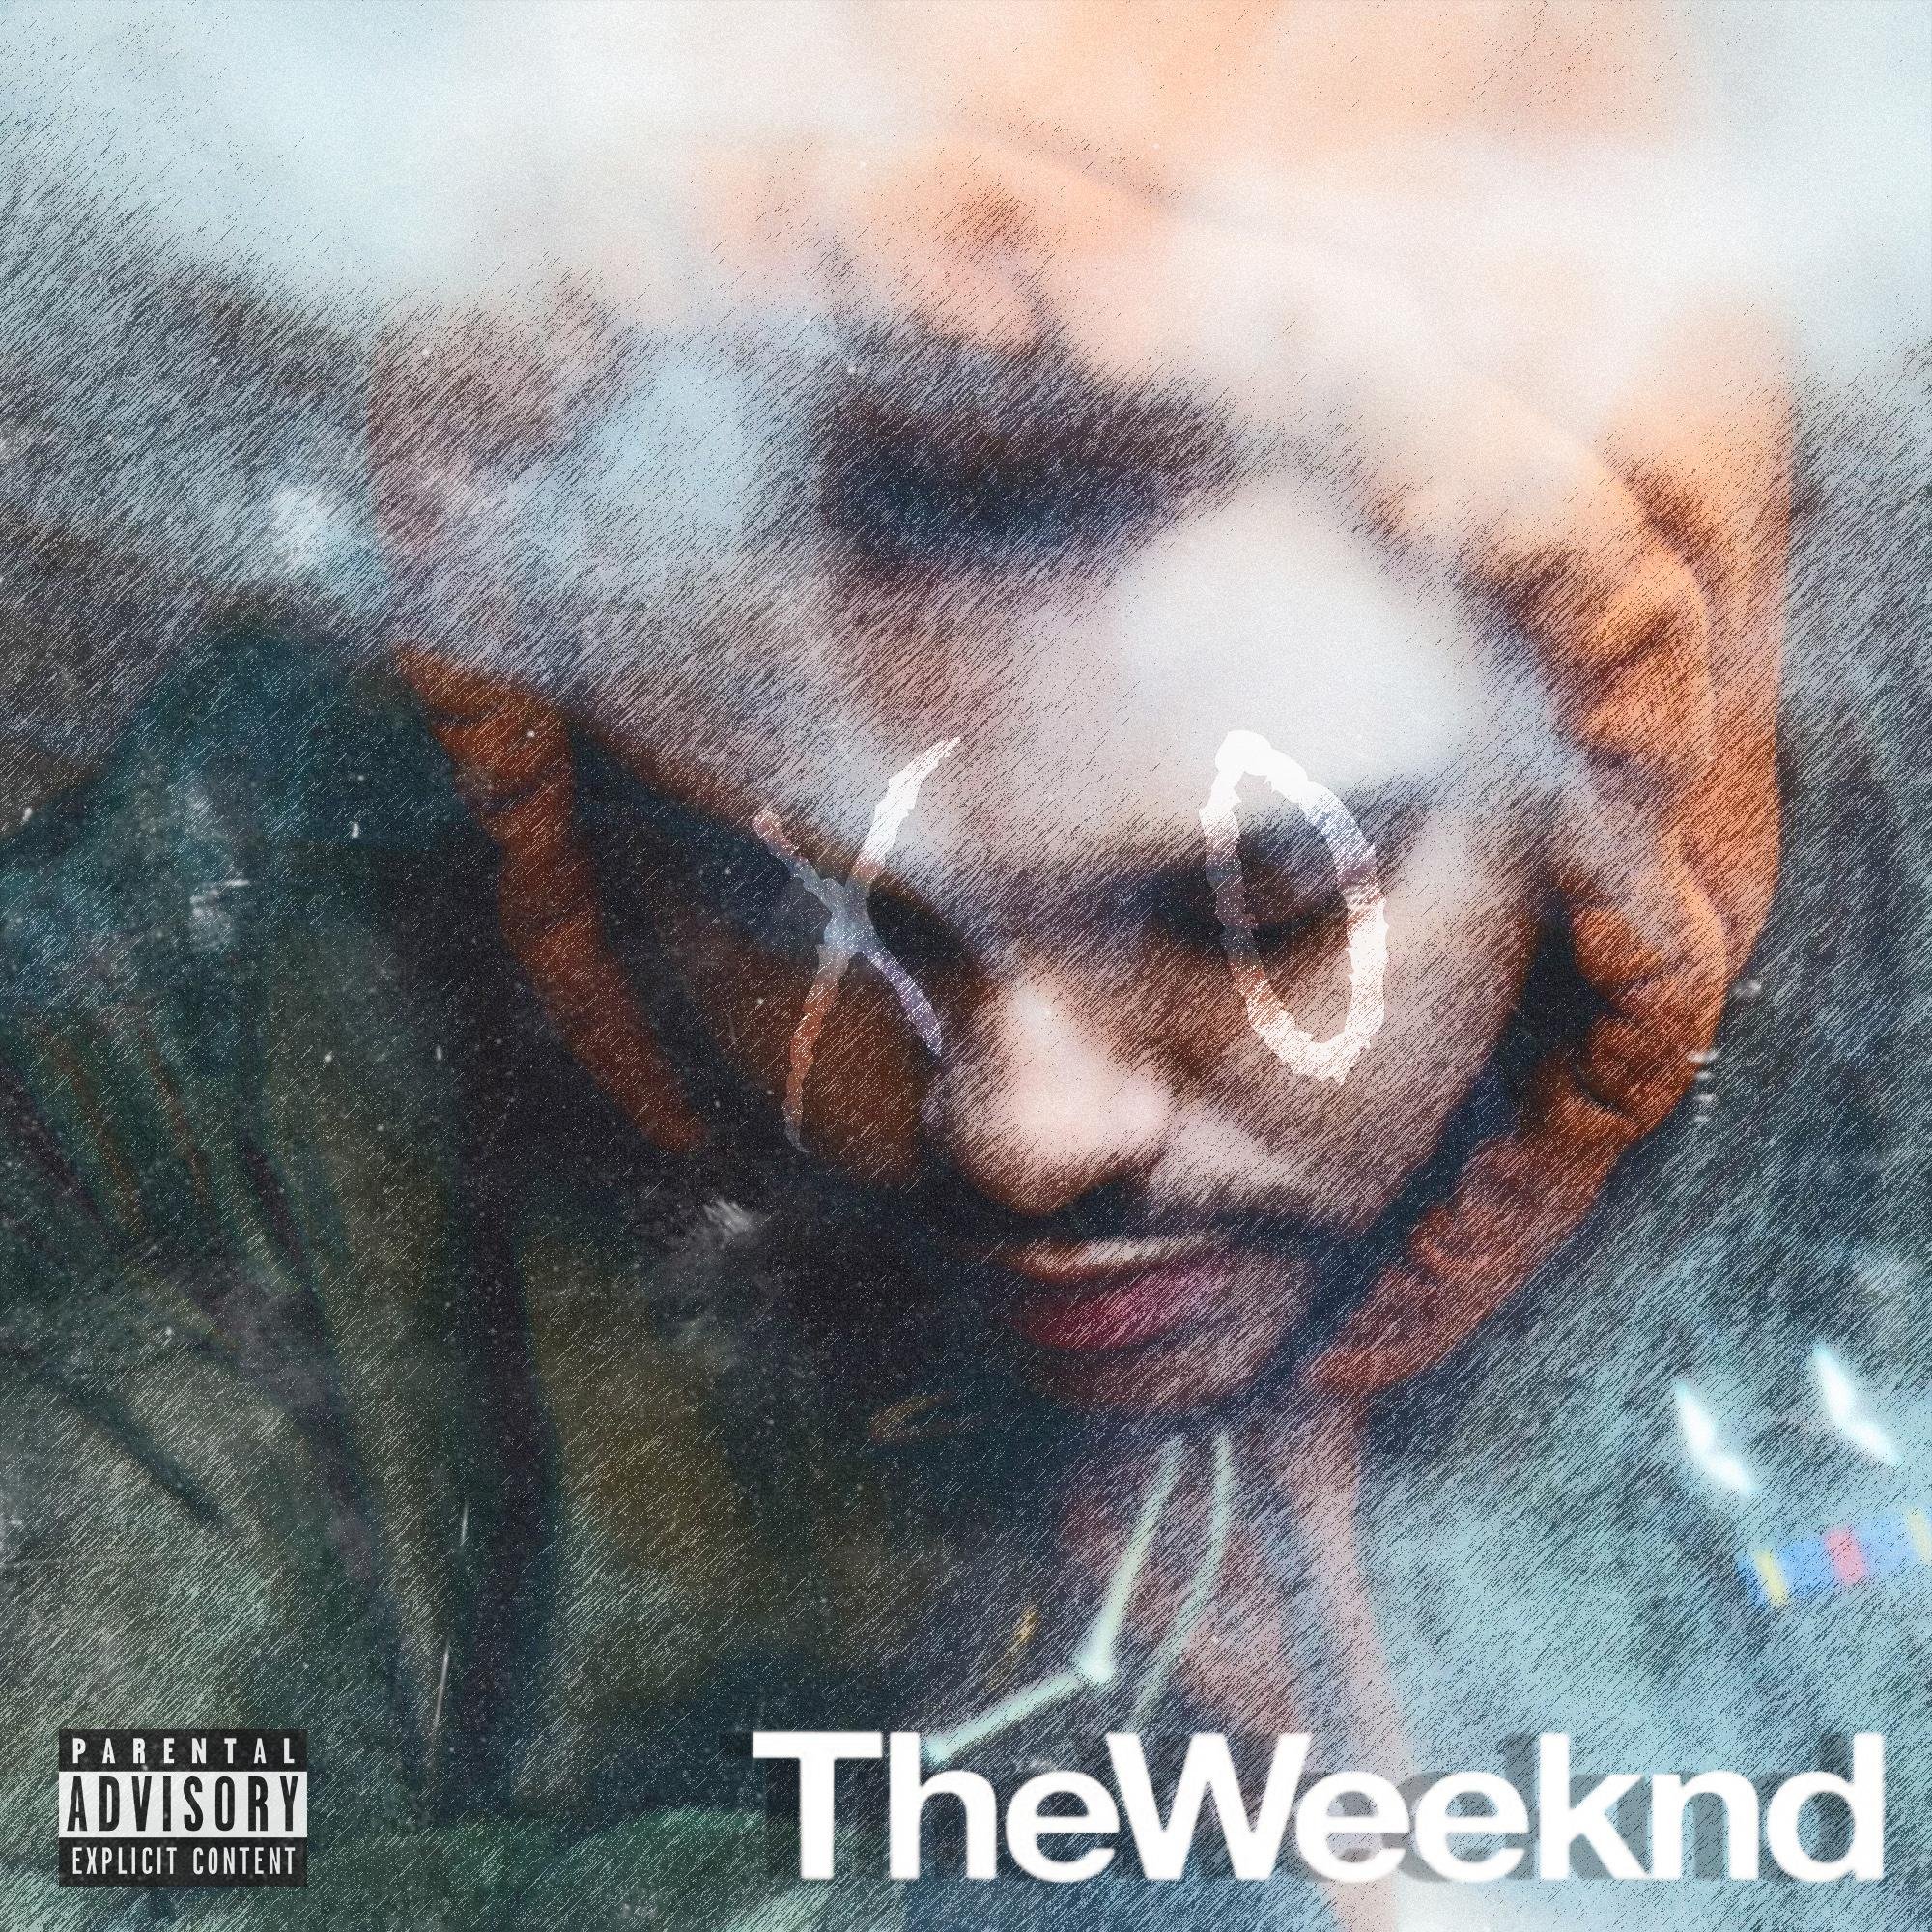 The Weeknd - Old News (feat. Belly)